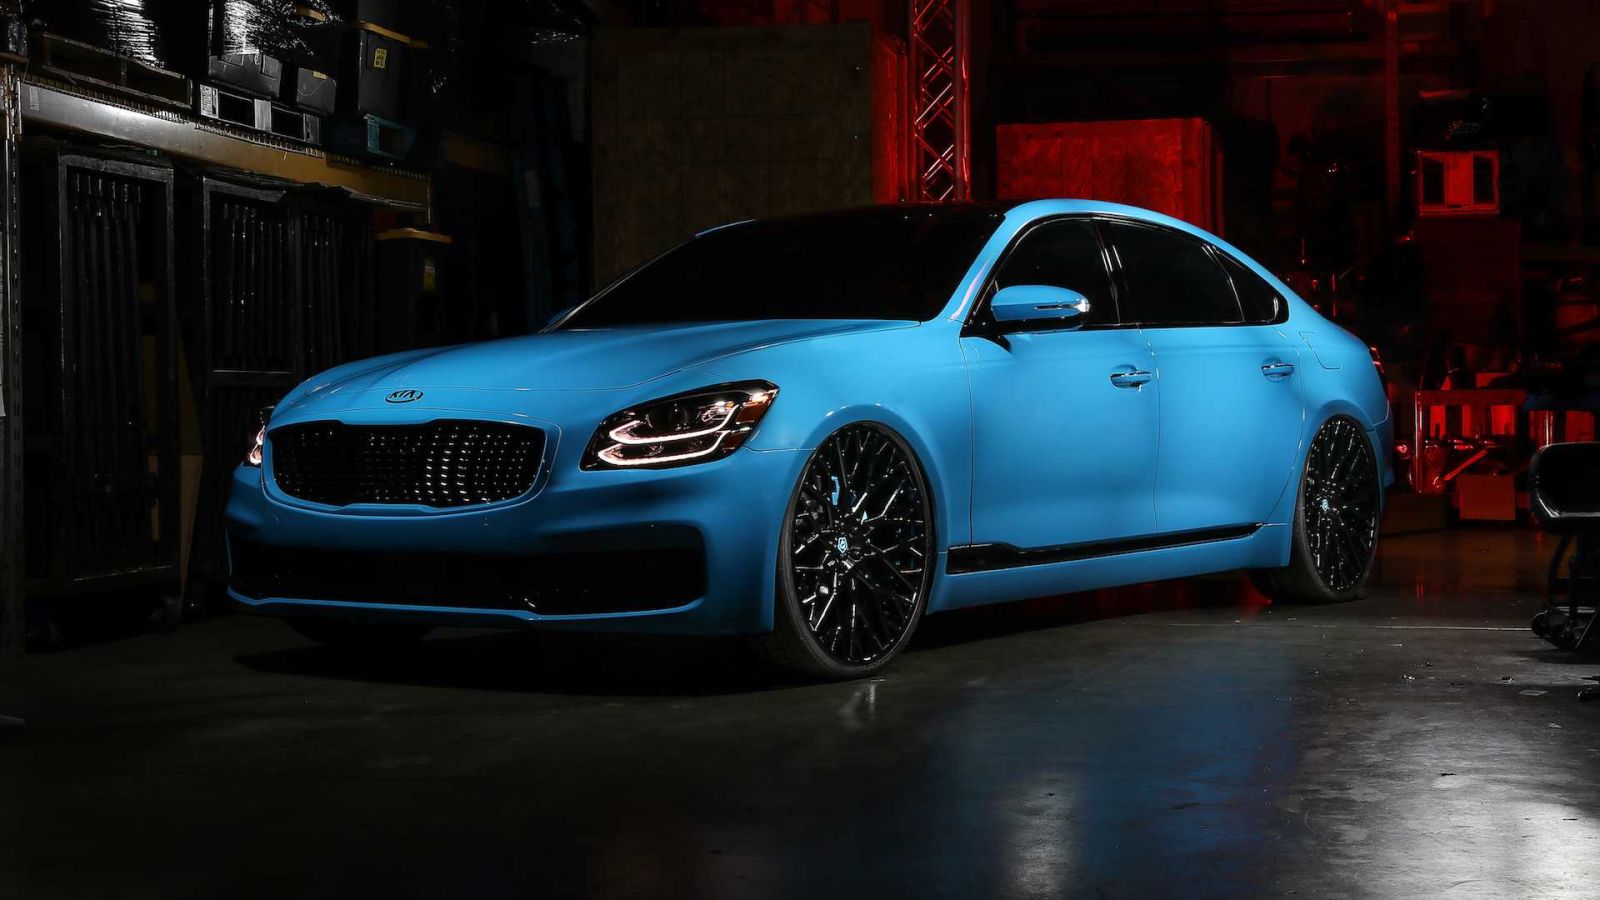 Illustration for article titled Kia K900 Smurf edition from SEMA